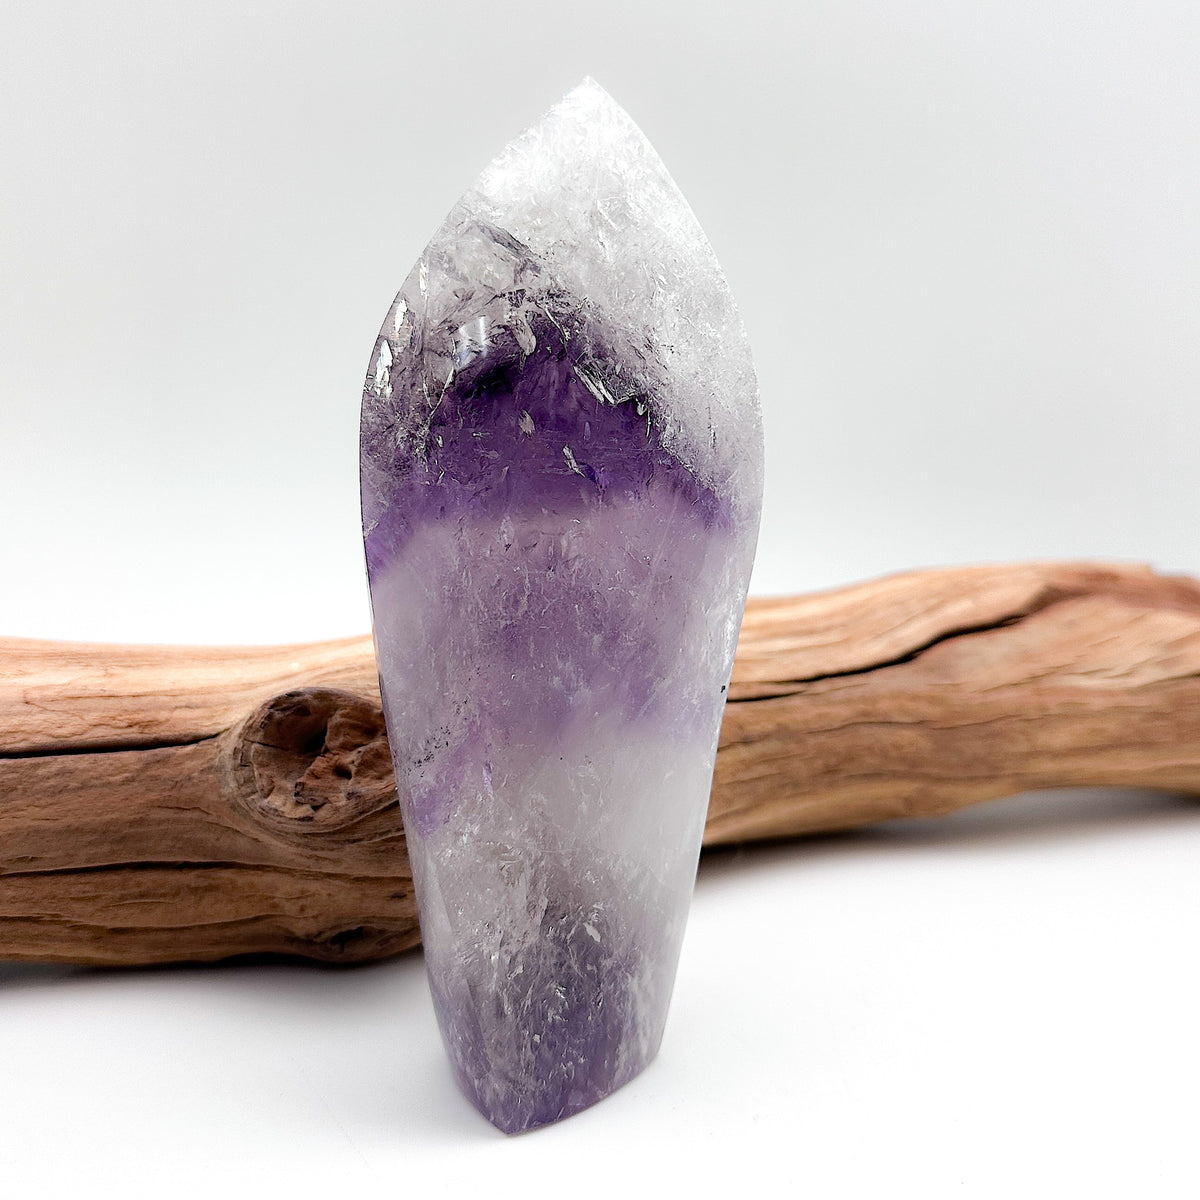 Full view shot of a large Amethyst crystal